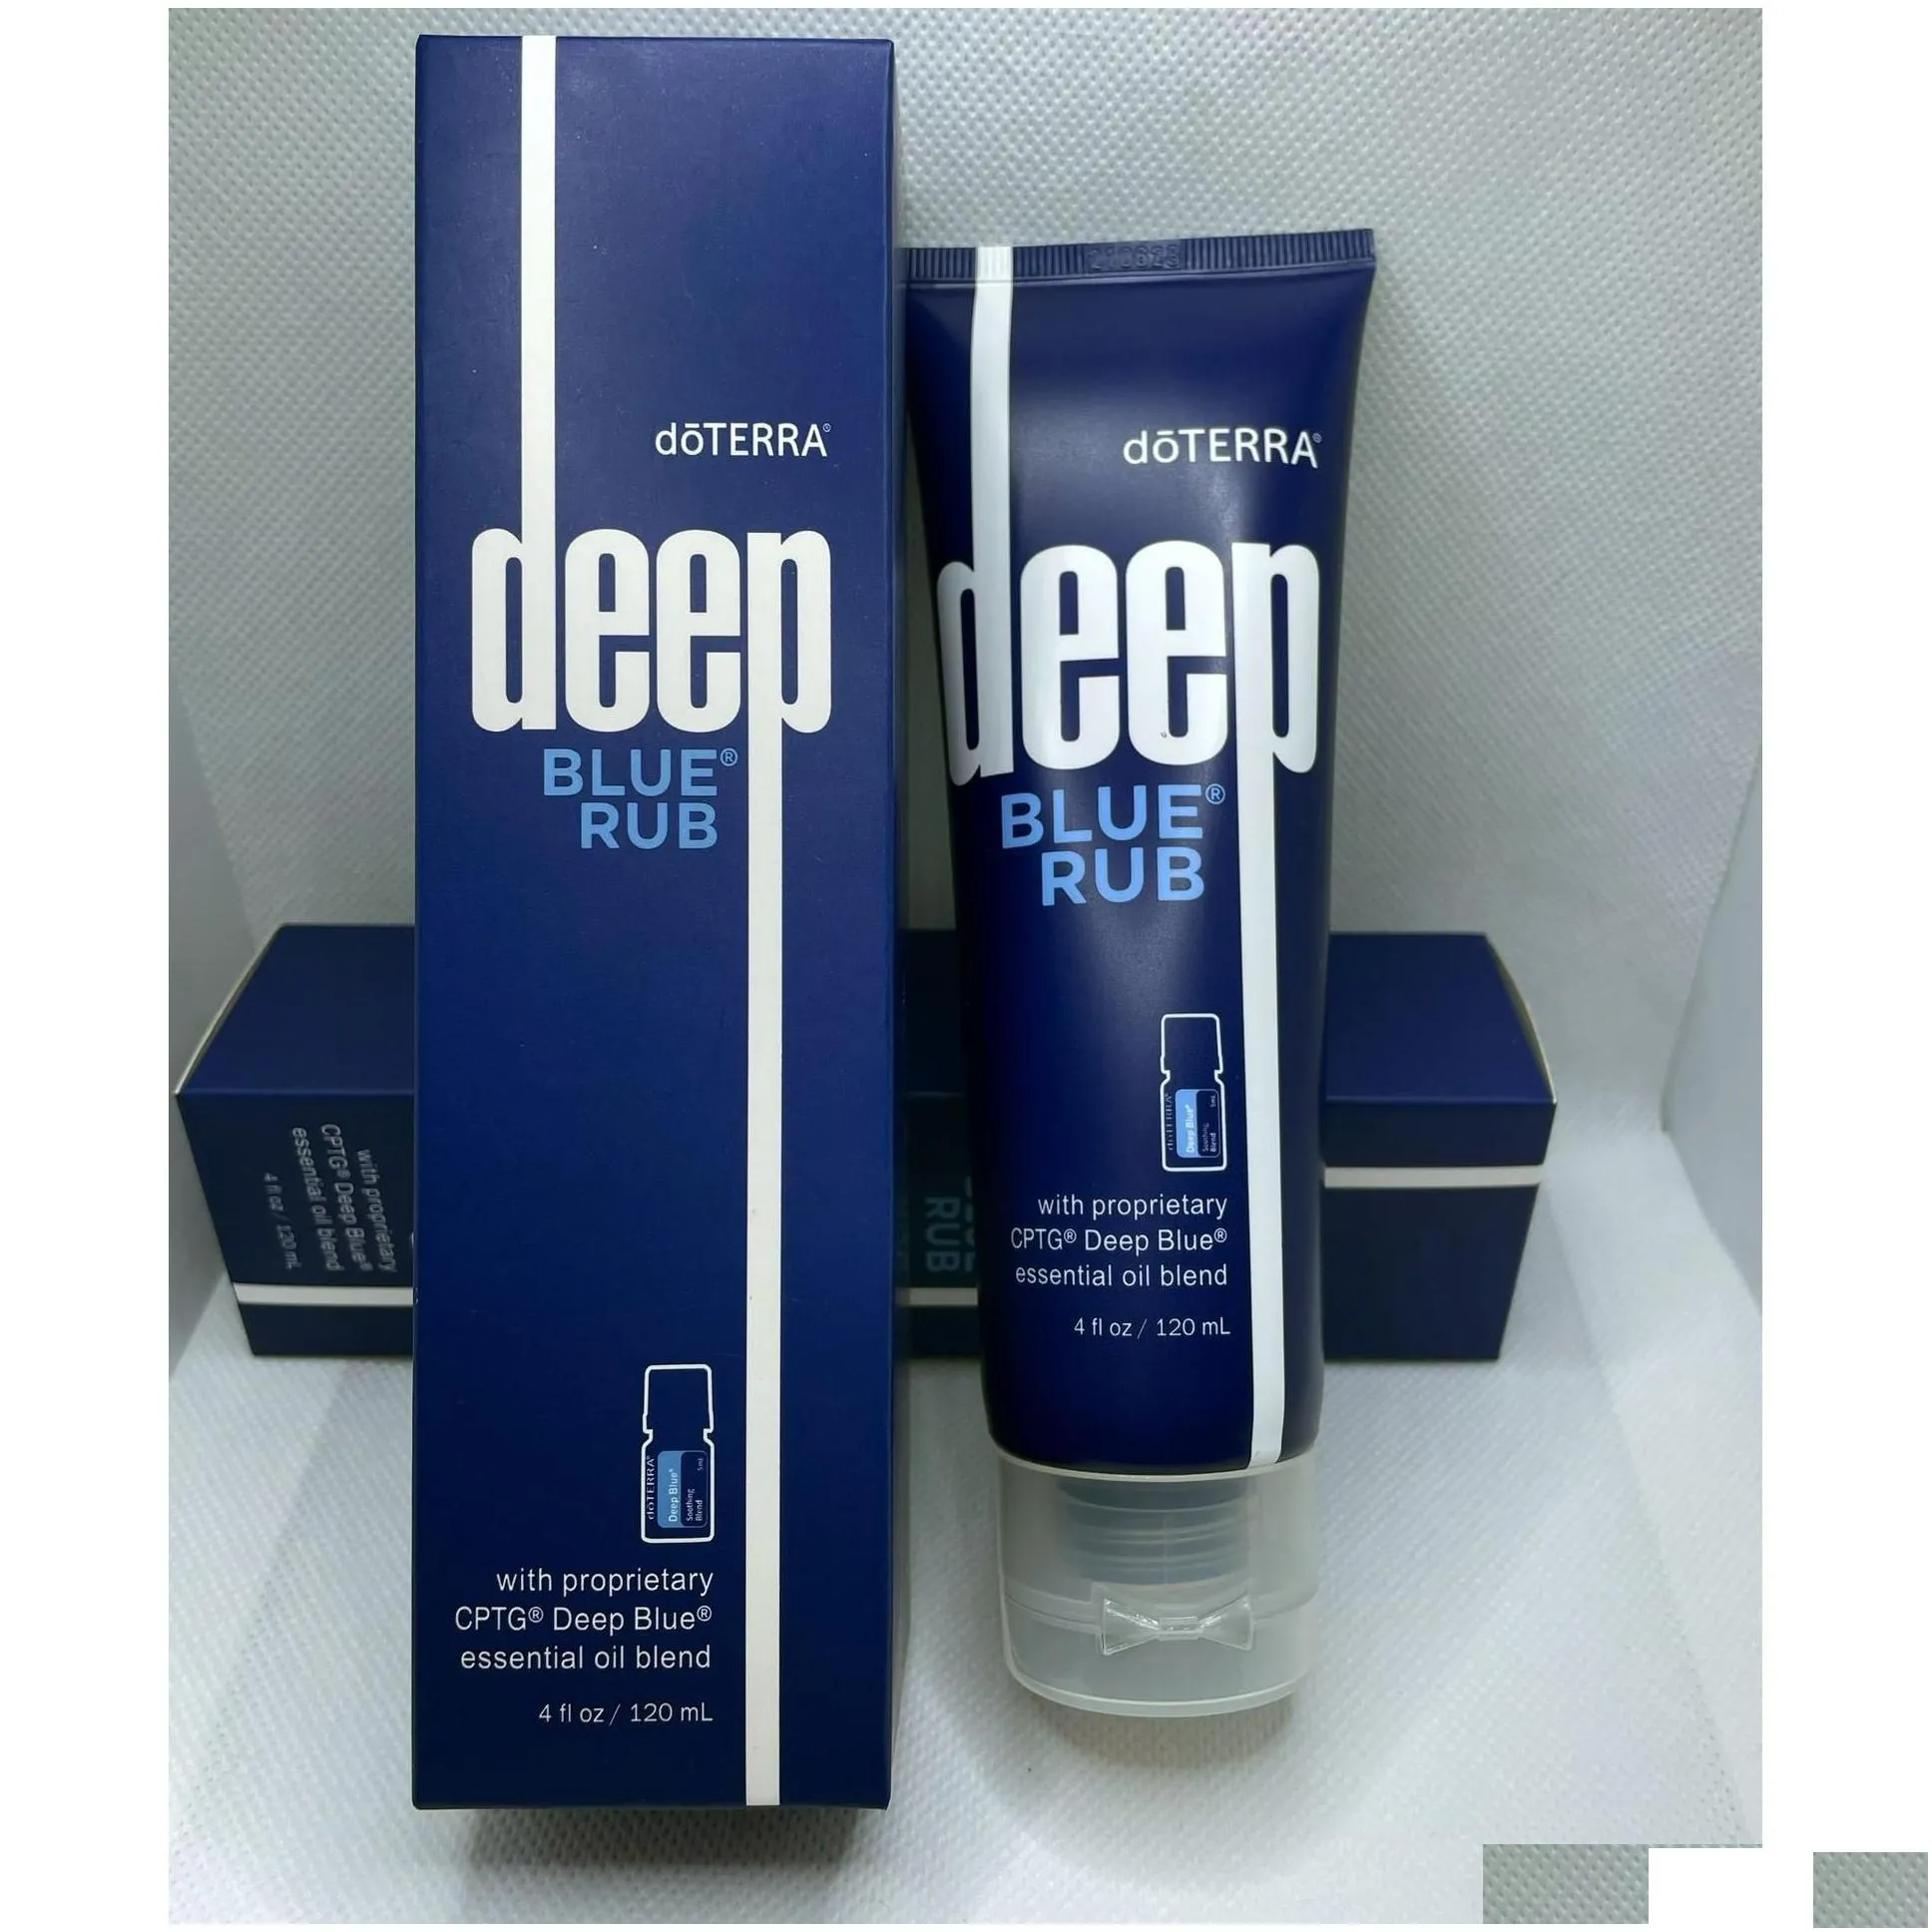 essential oil foundation primer body skin care deep blue rub topical cream 120ml lotions drop delivery health beauty fragrance deodor